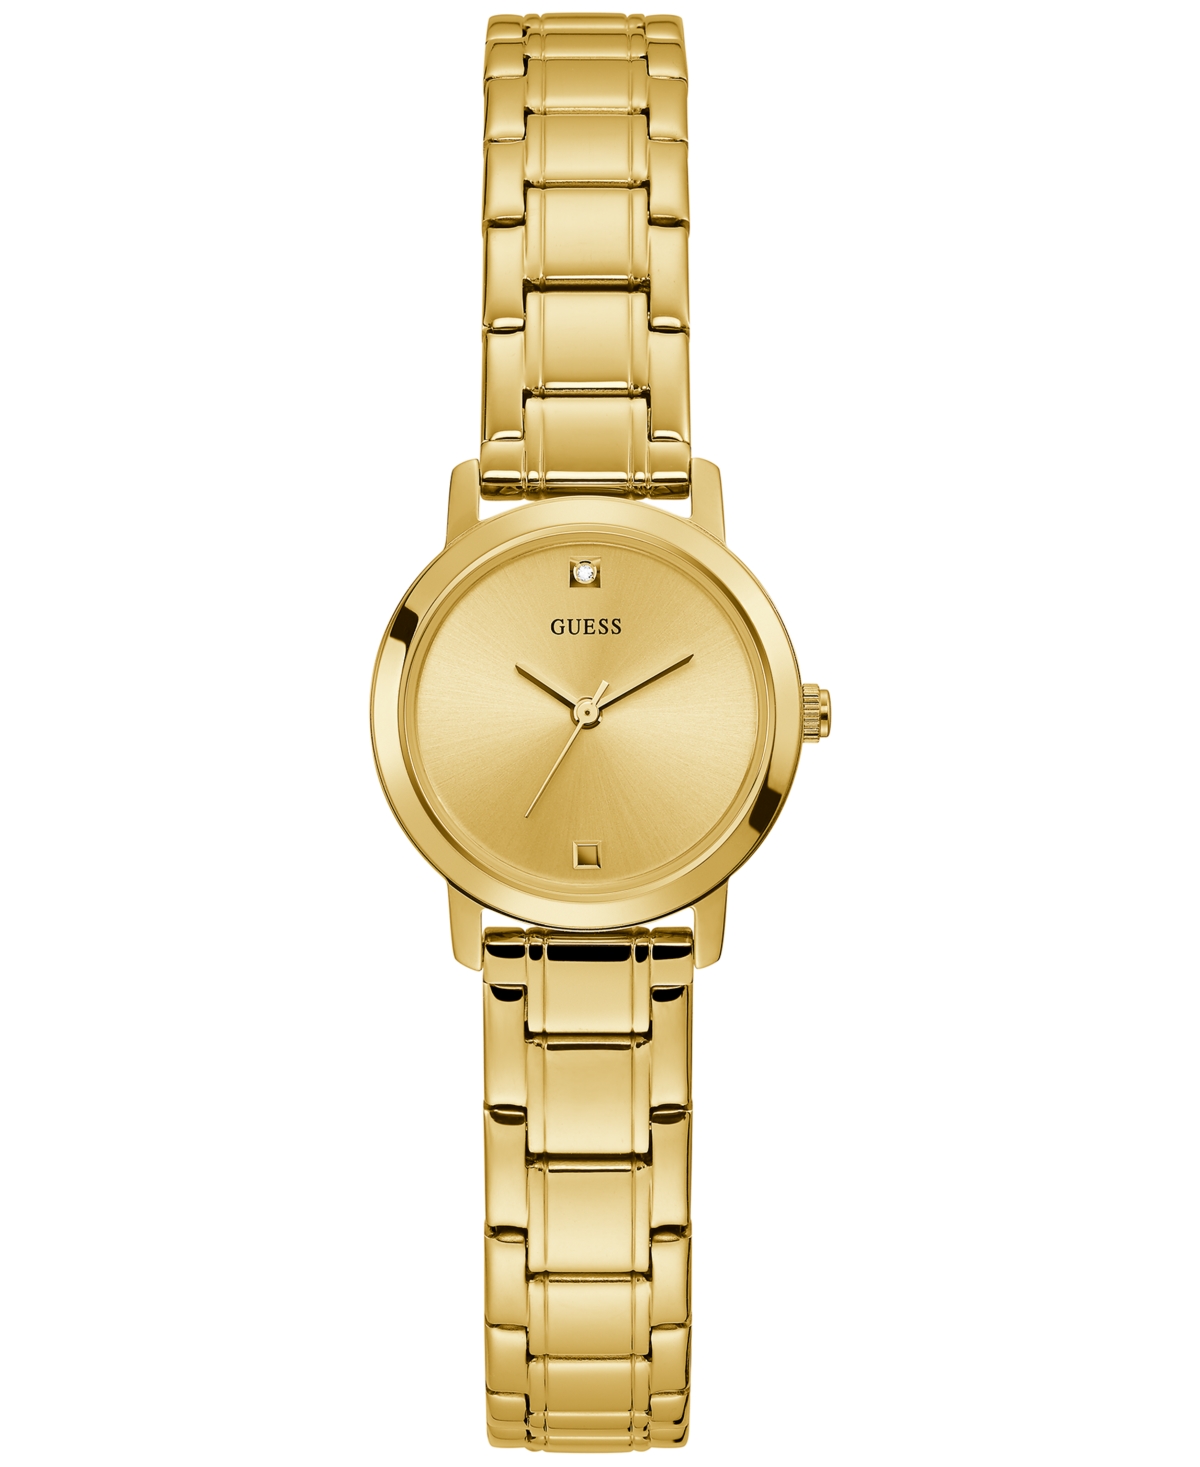 GUESS WOMEN'S DIAMOND-ACCENT GOLD-TONE STAINLESS STEEL BRACELET WATCH 25MM